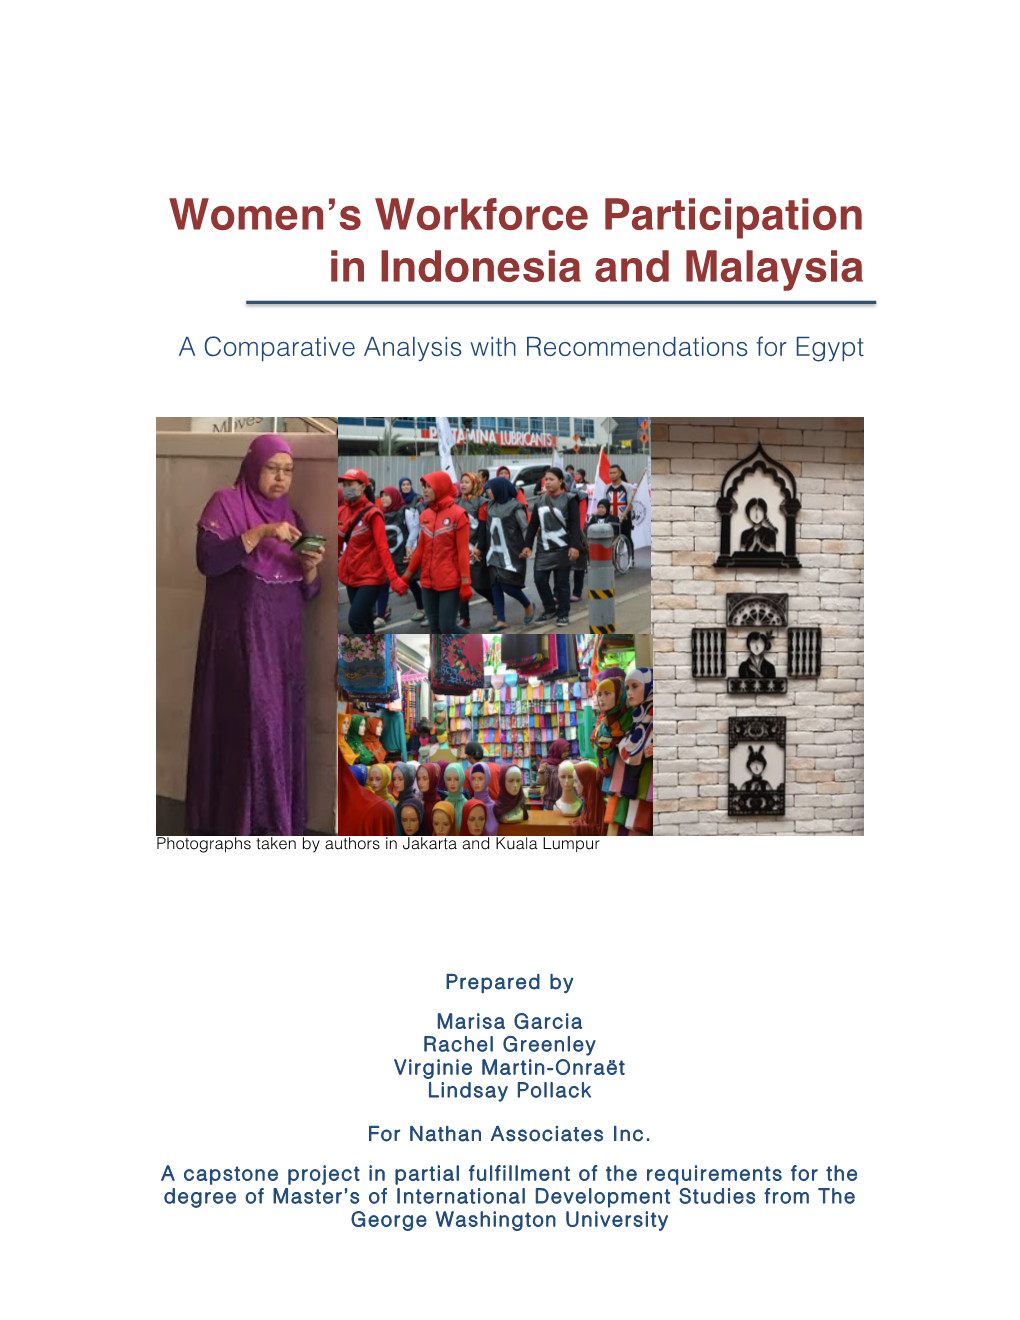 Women's Workforce Participation in Indonesia and Malaysia